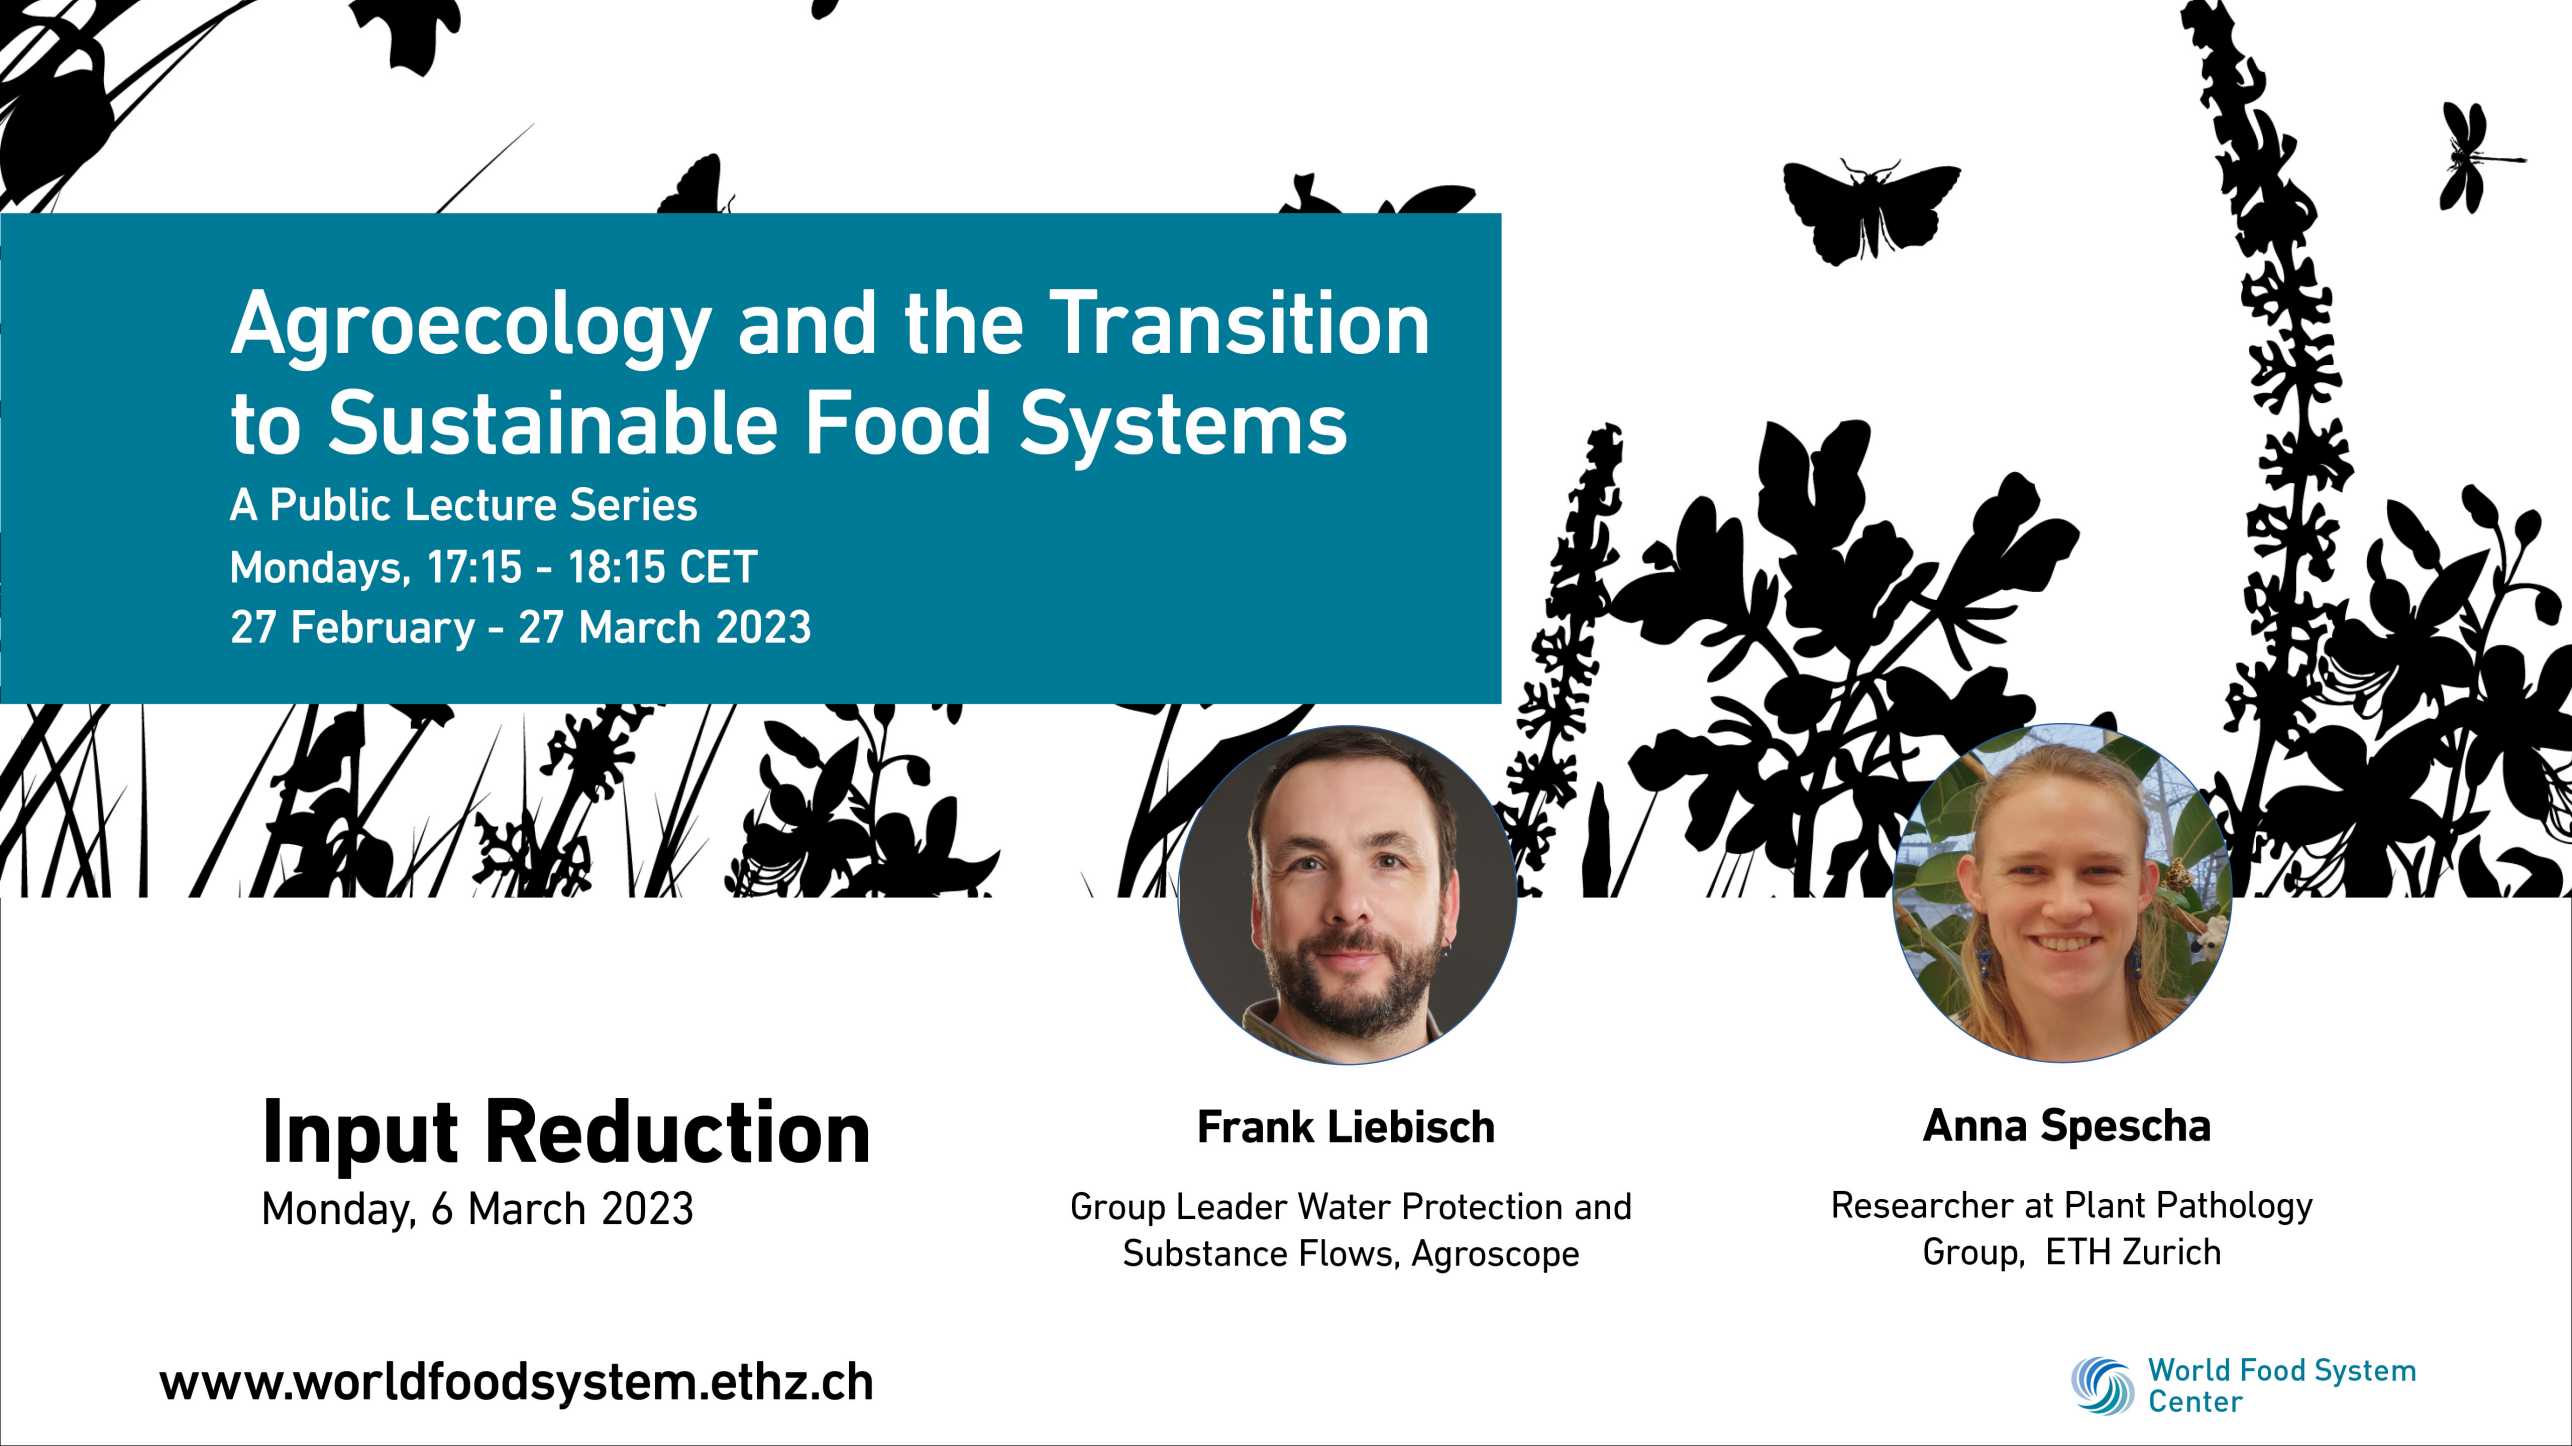 Enlarged view: Agroecology Lecture Series - Input Reduction